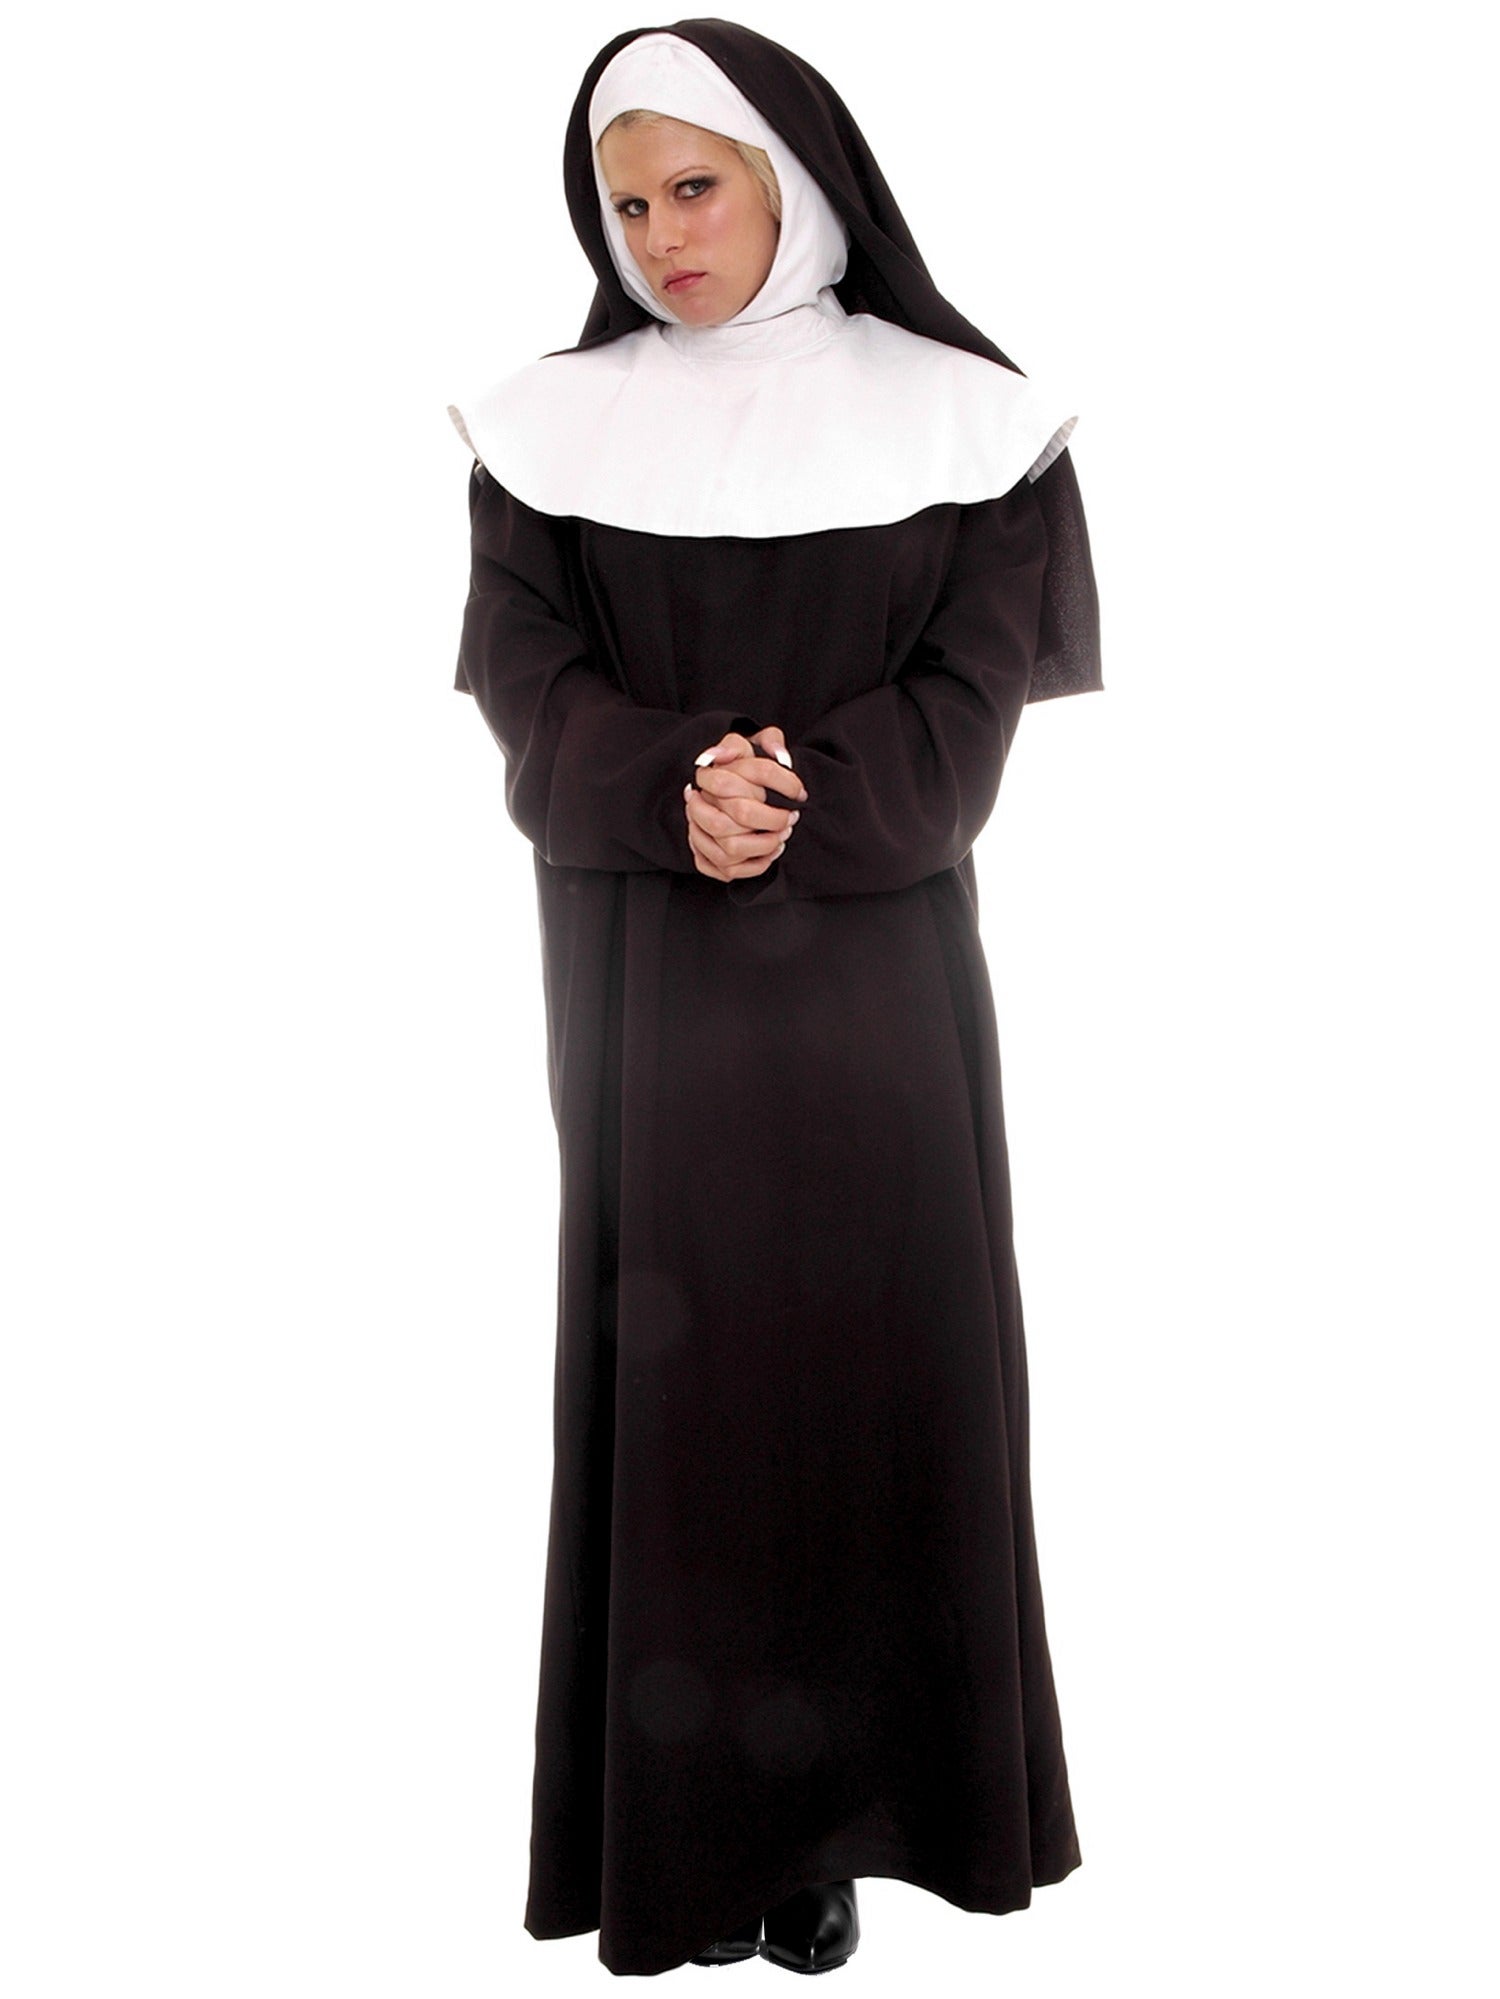 Hobbypos Mother Superior Nun Sister Religious Catholic Habit Deluxe Adult Womens Costume